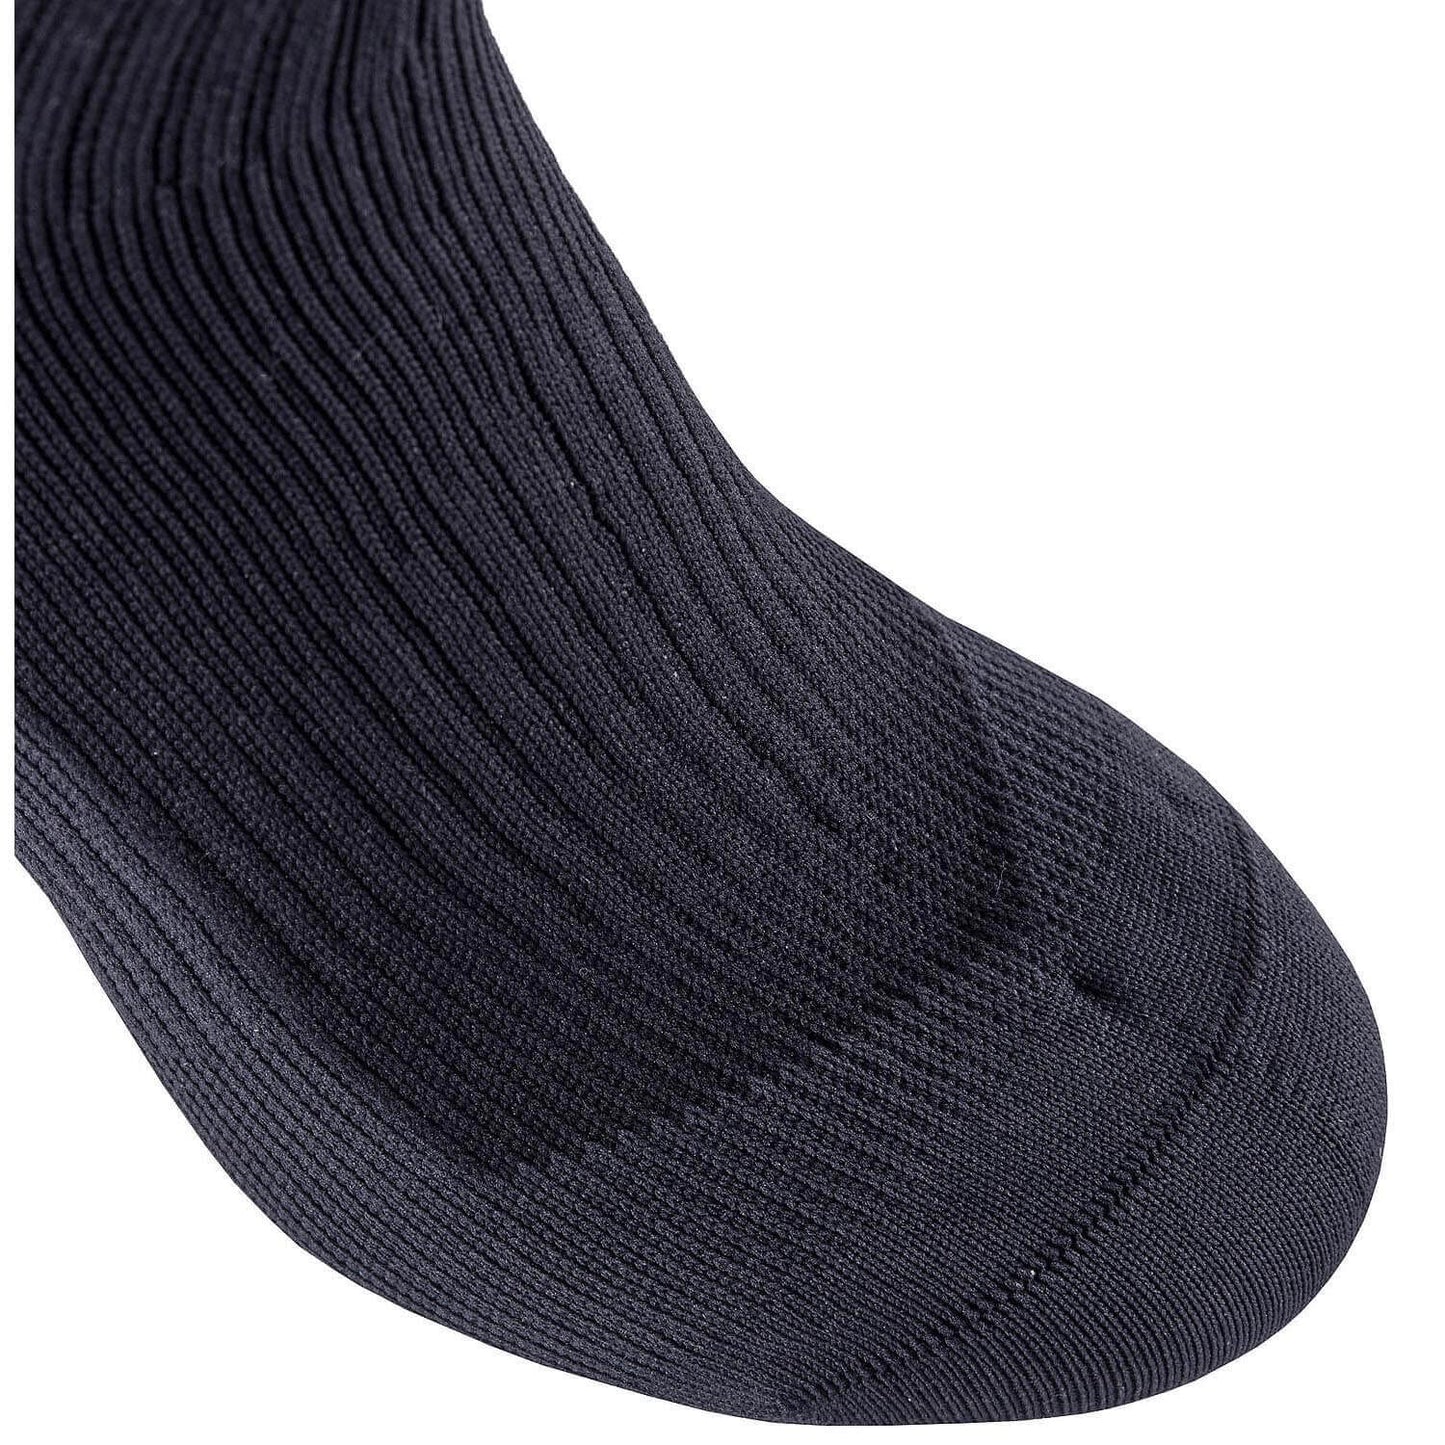 NRS SealSkinz Mid-Weight Mid-Length Sock